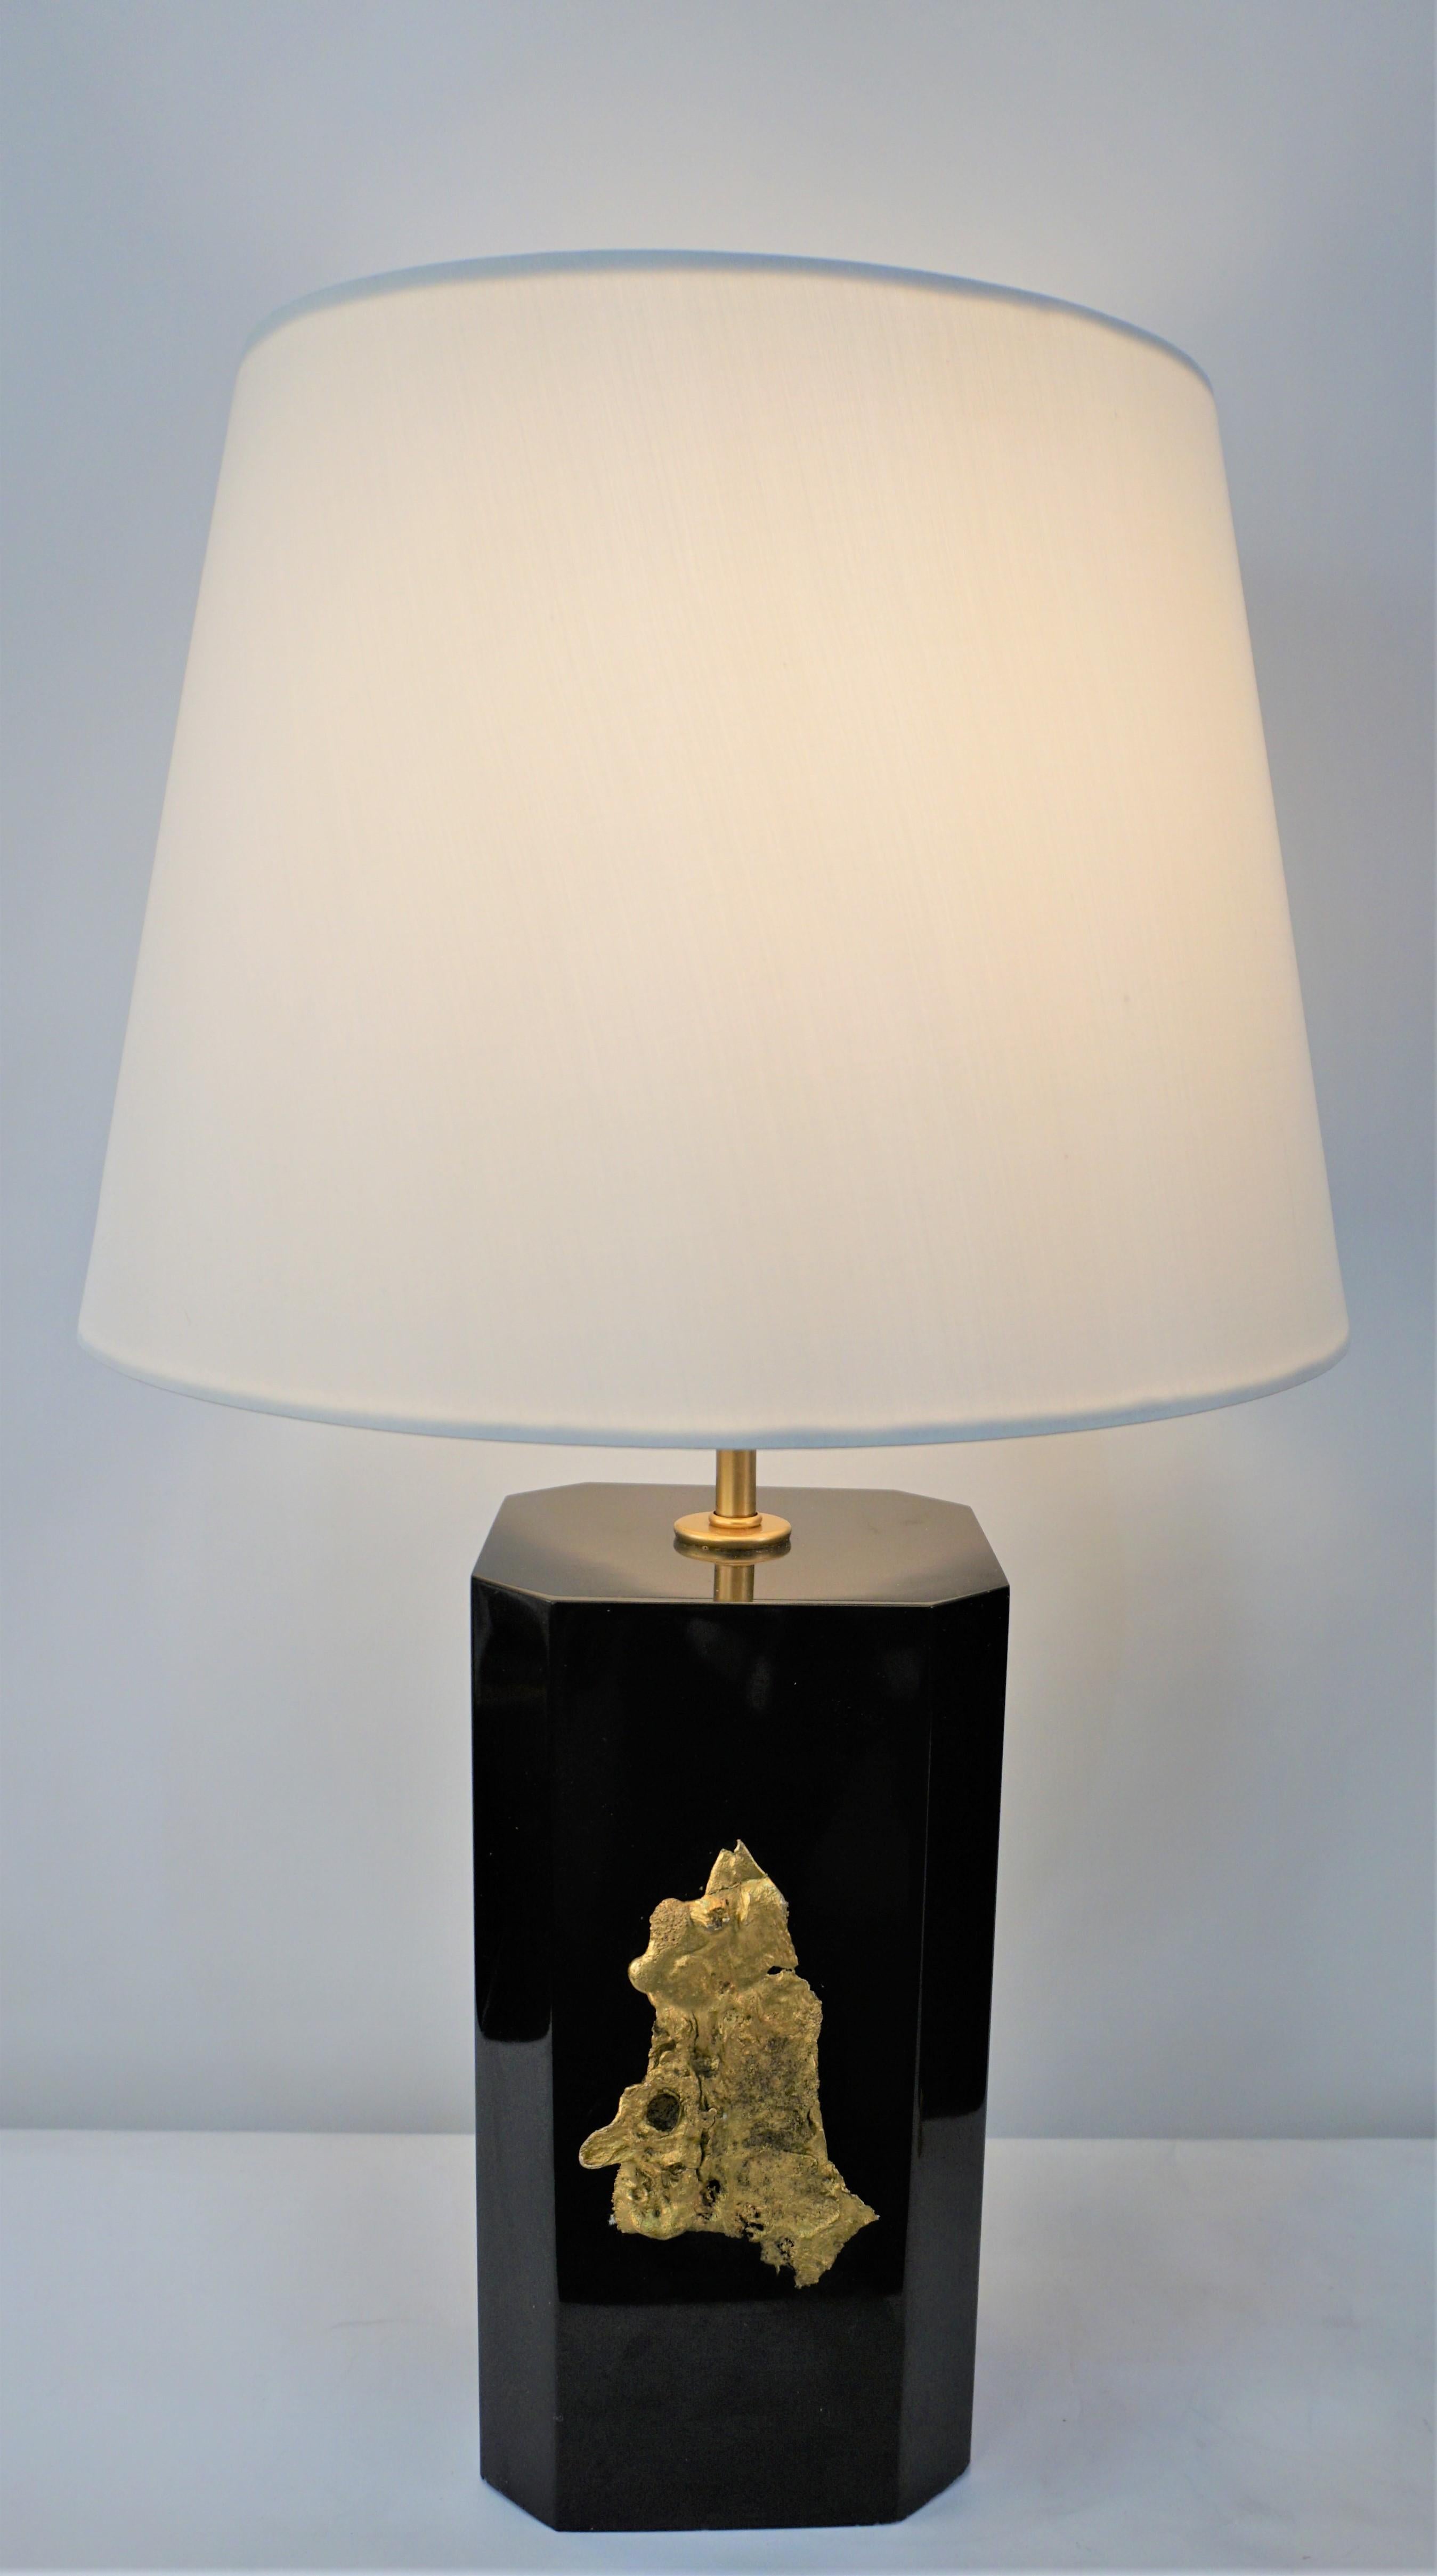 Pair of squire cut corner gloss black granite with gold plated decorations table lamps.